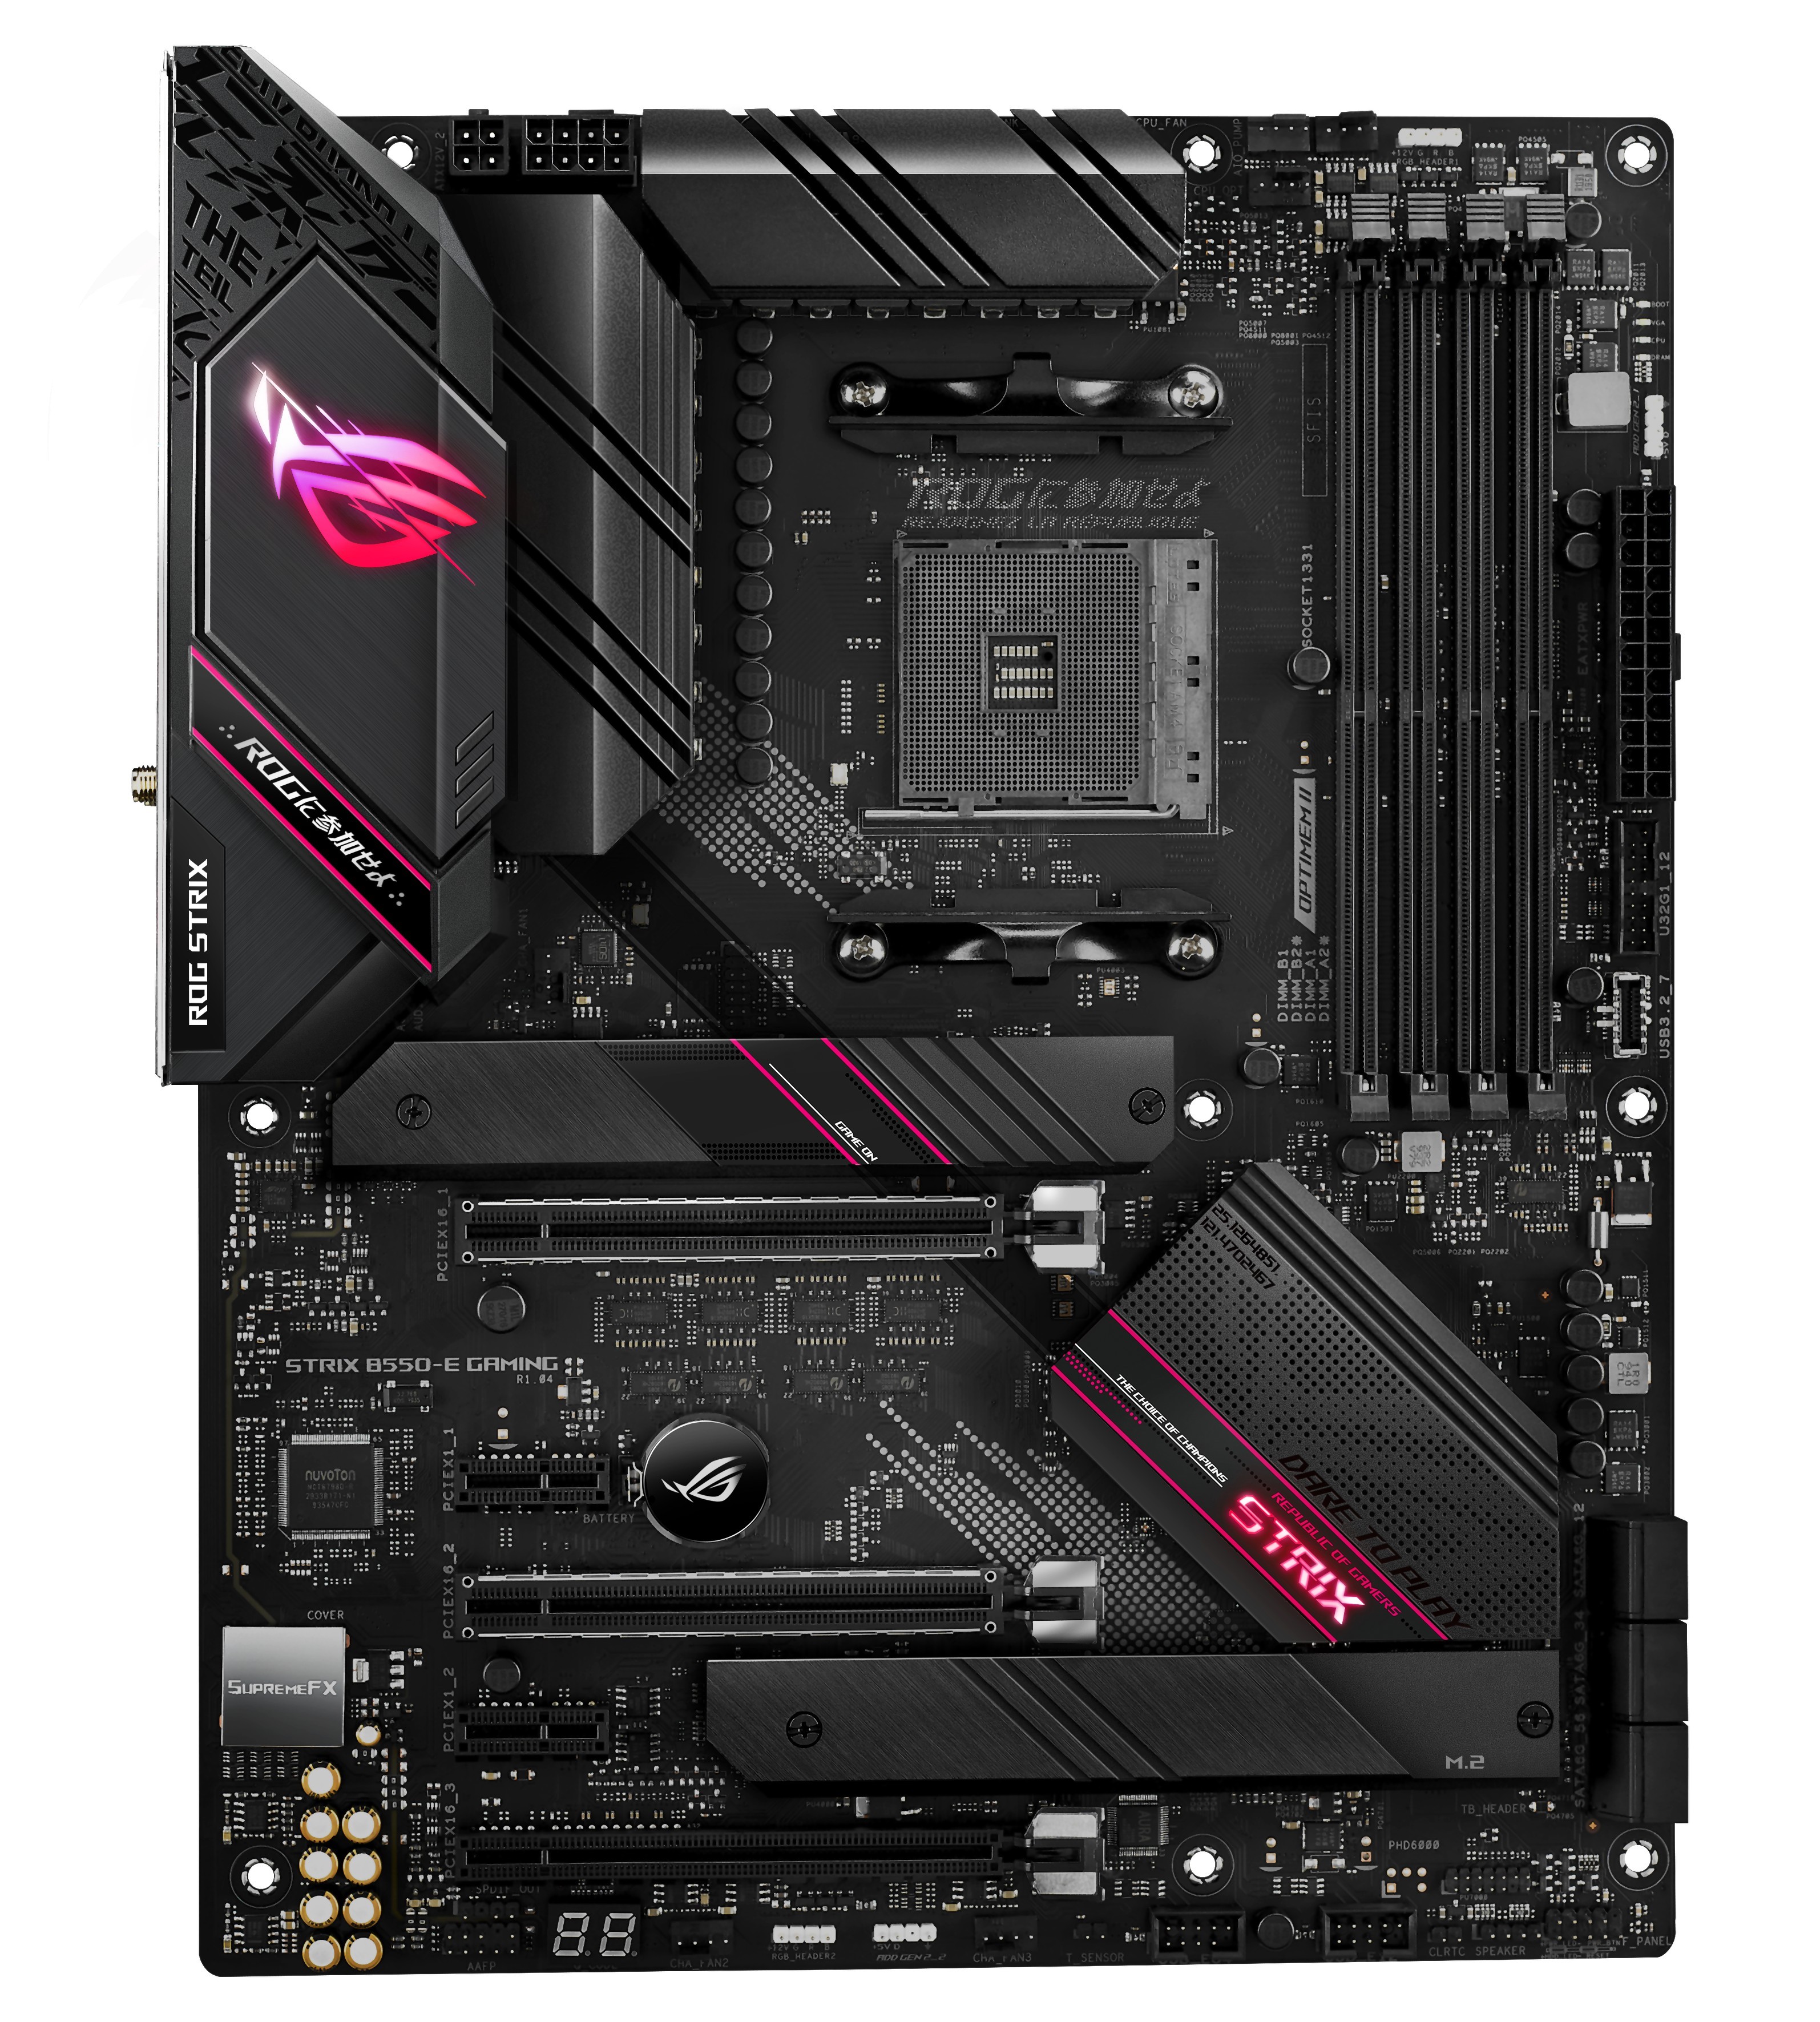 ASUS ROG Strix B550-E Gaming - The AMD B550 Motherboard Overview 